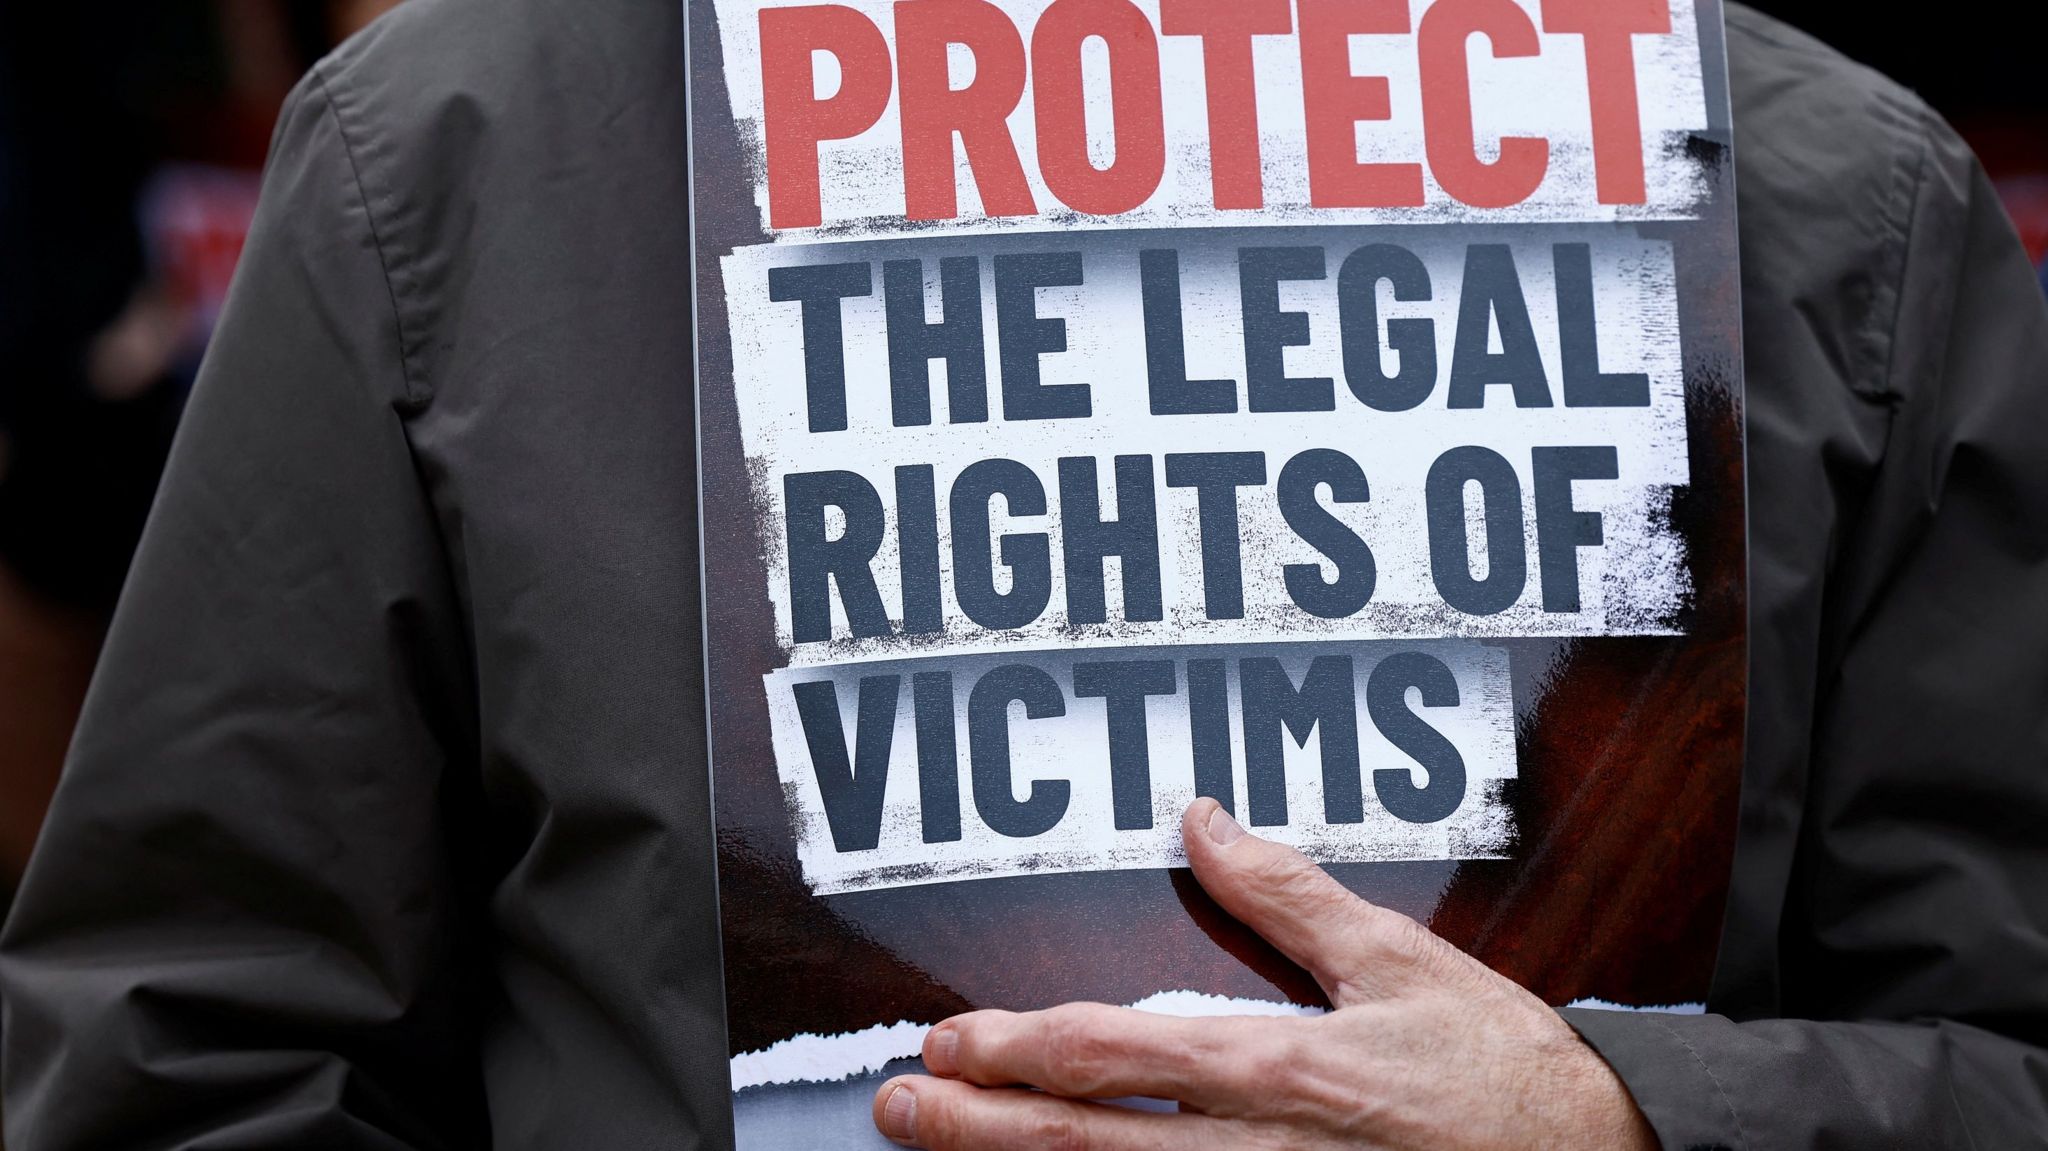 Man holding sign saying Protect the legal rights of victims